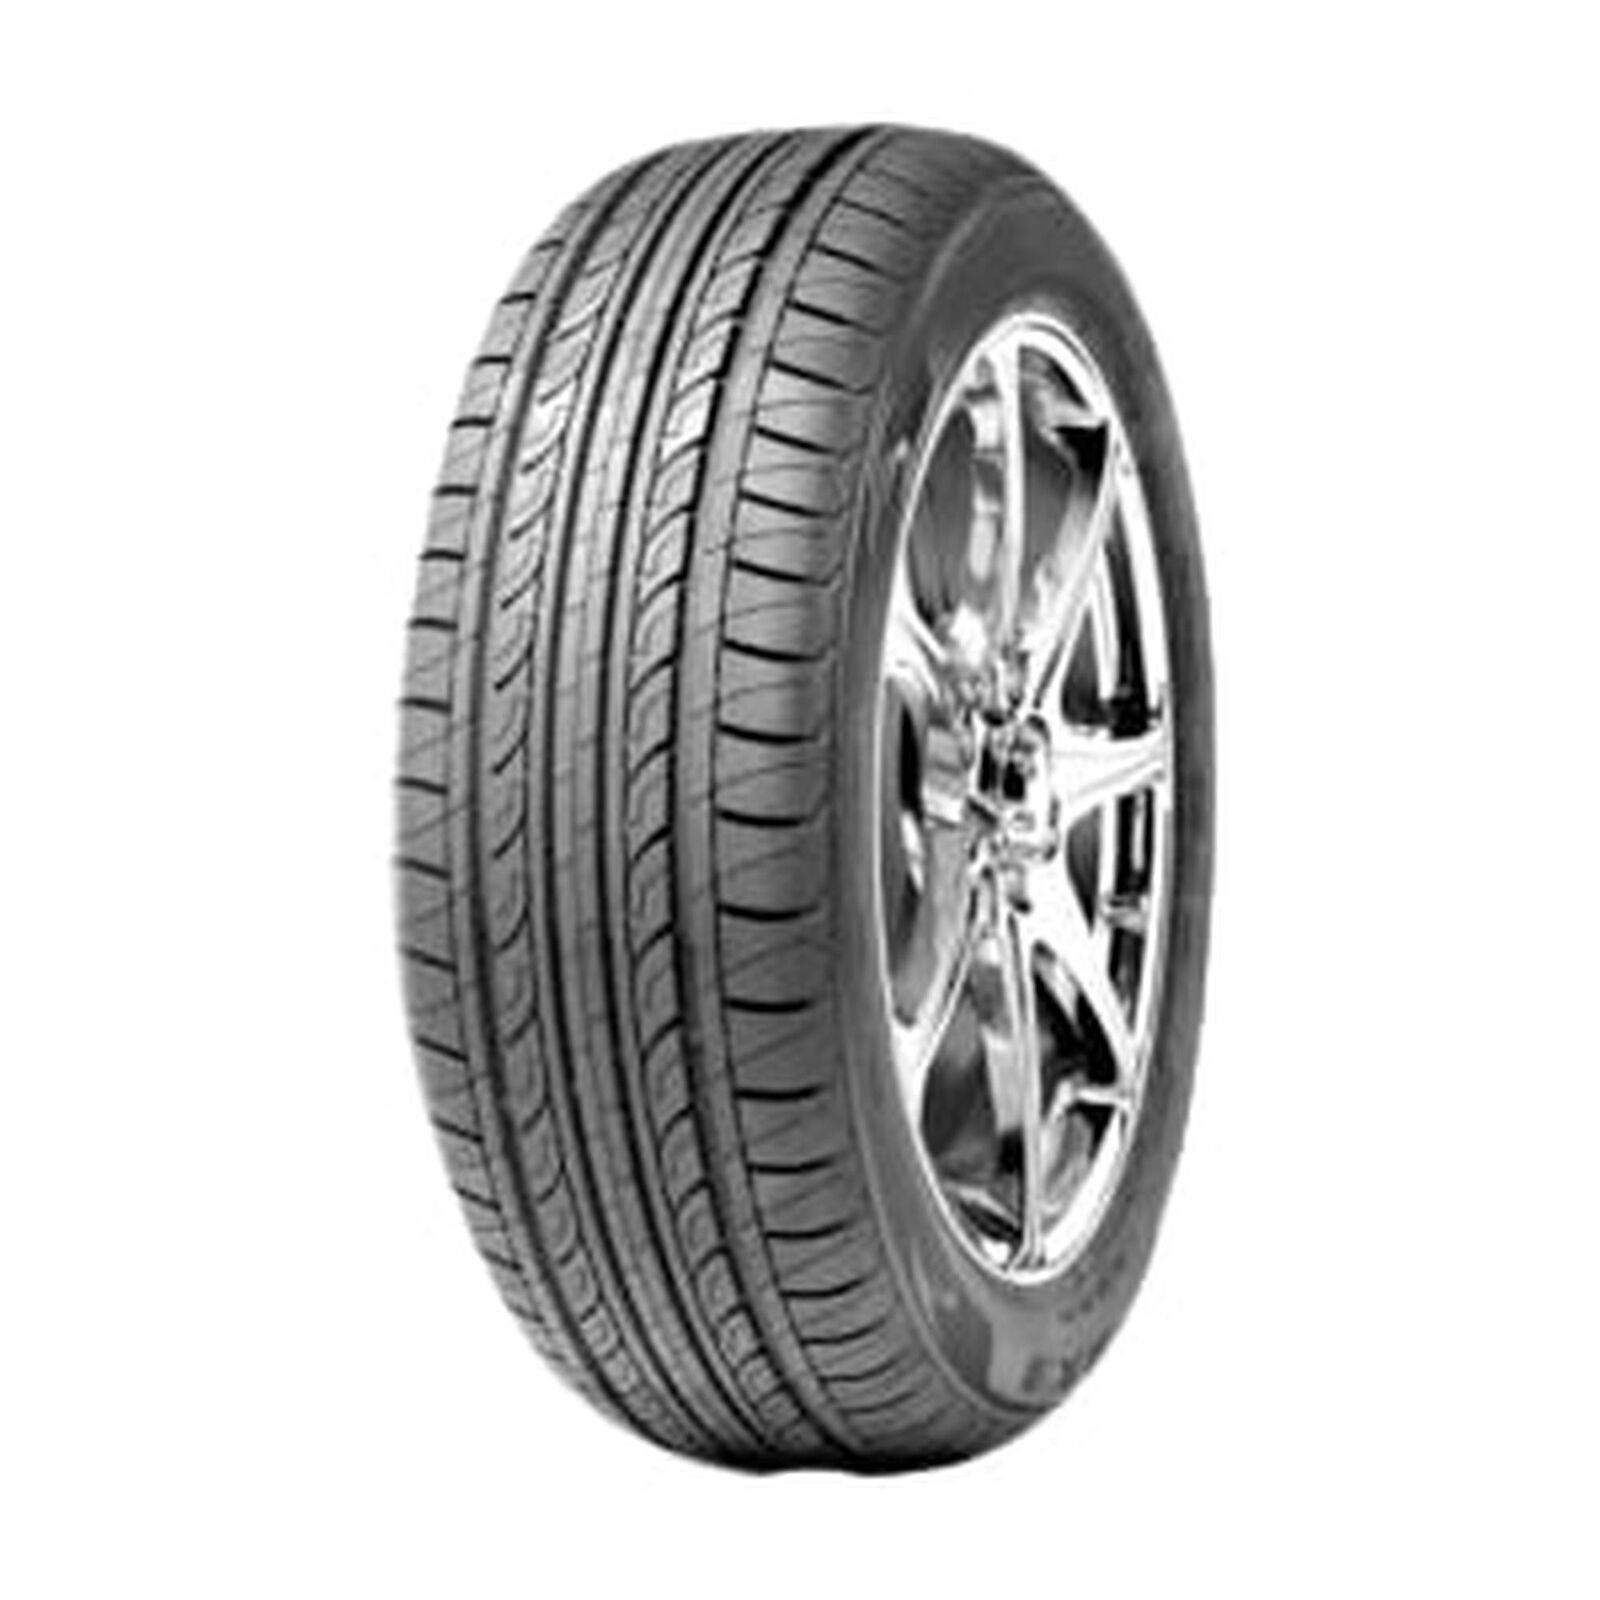 1 New Ardent Hp Rx3  - 185/60r14 Tires 1856014 185 60 14